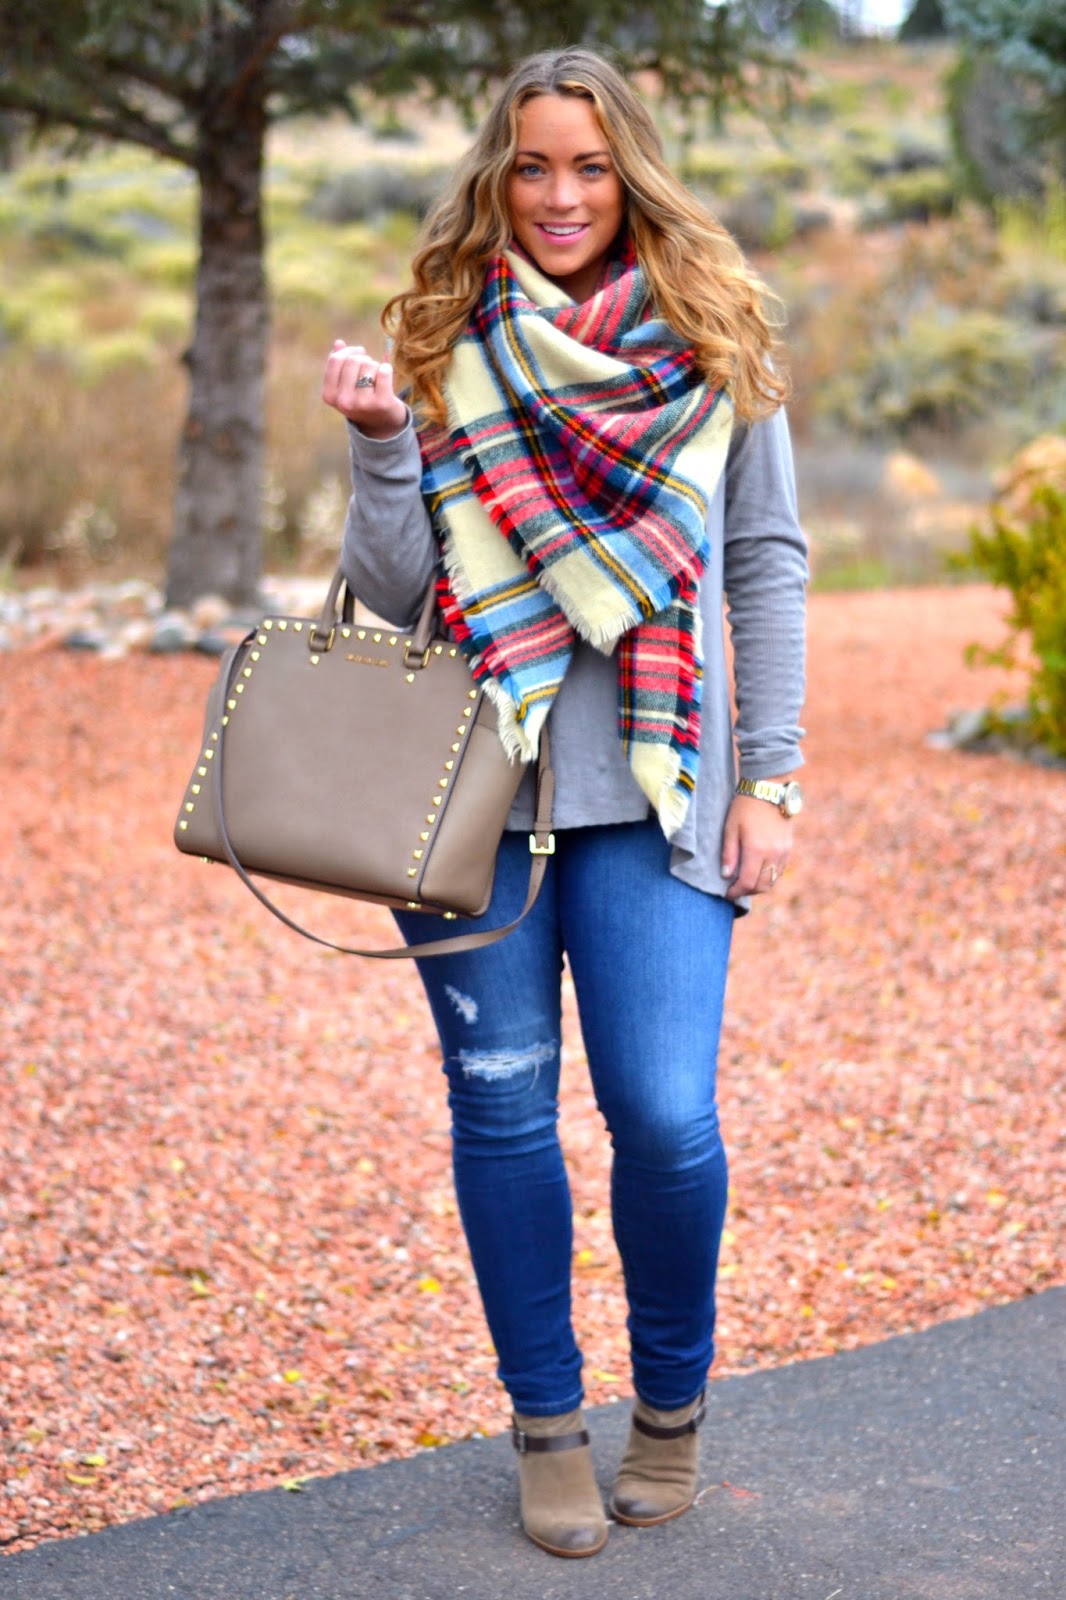 The Blanket Scarf